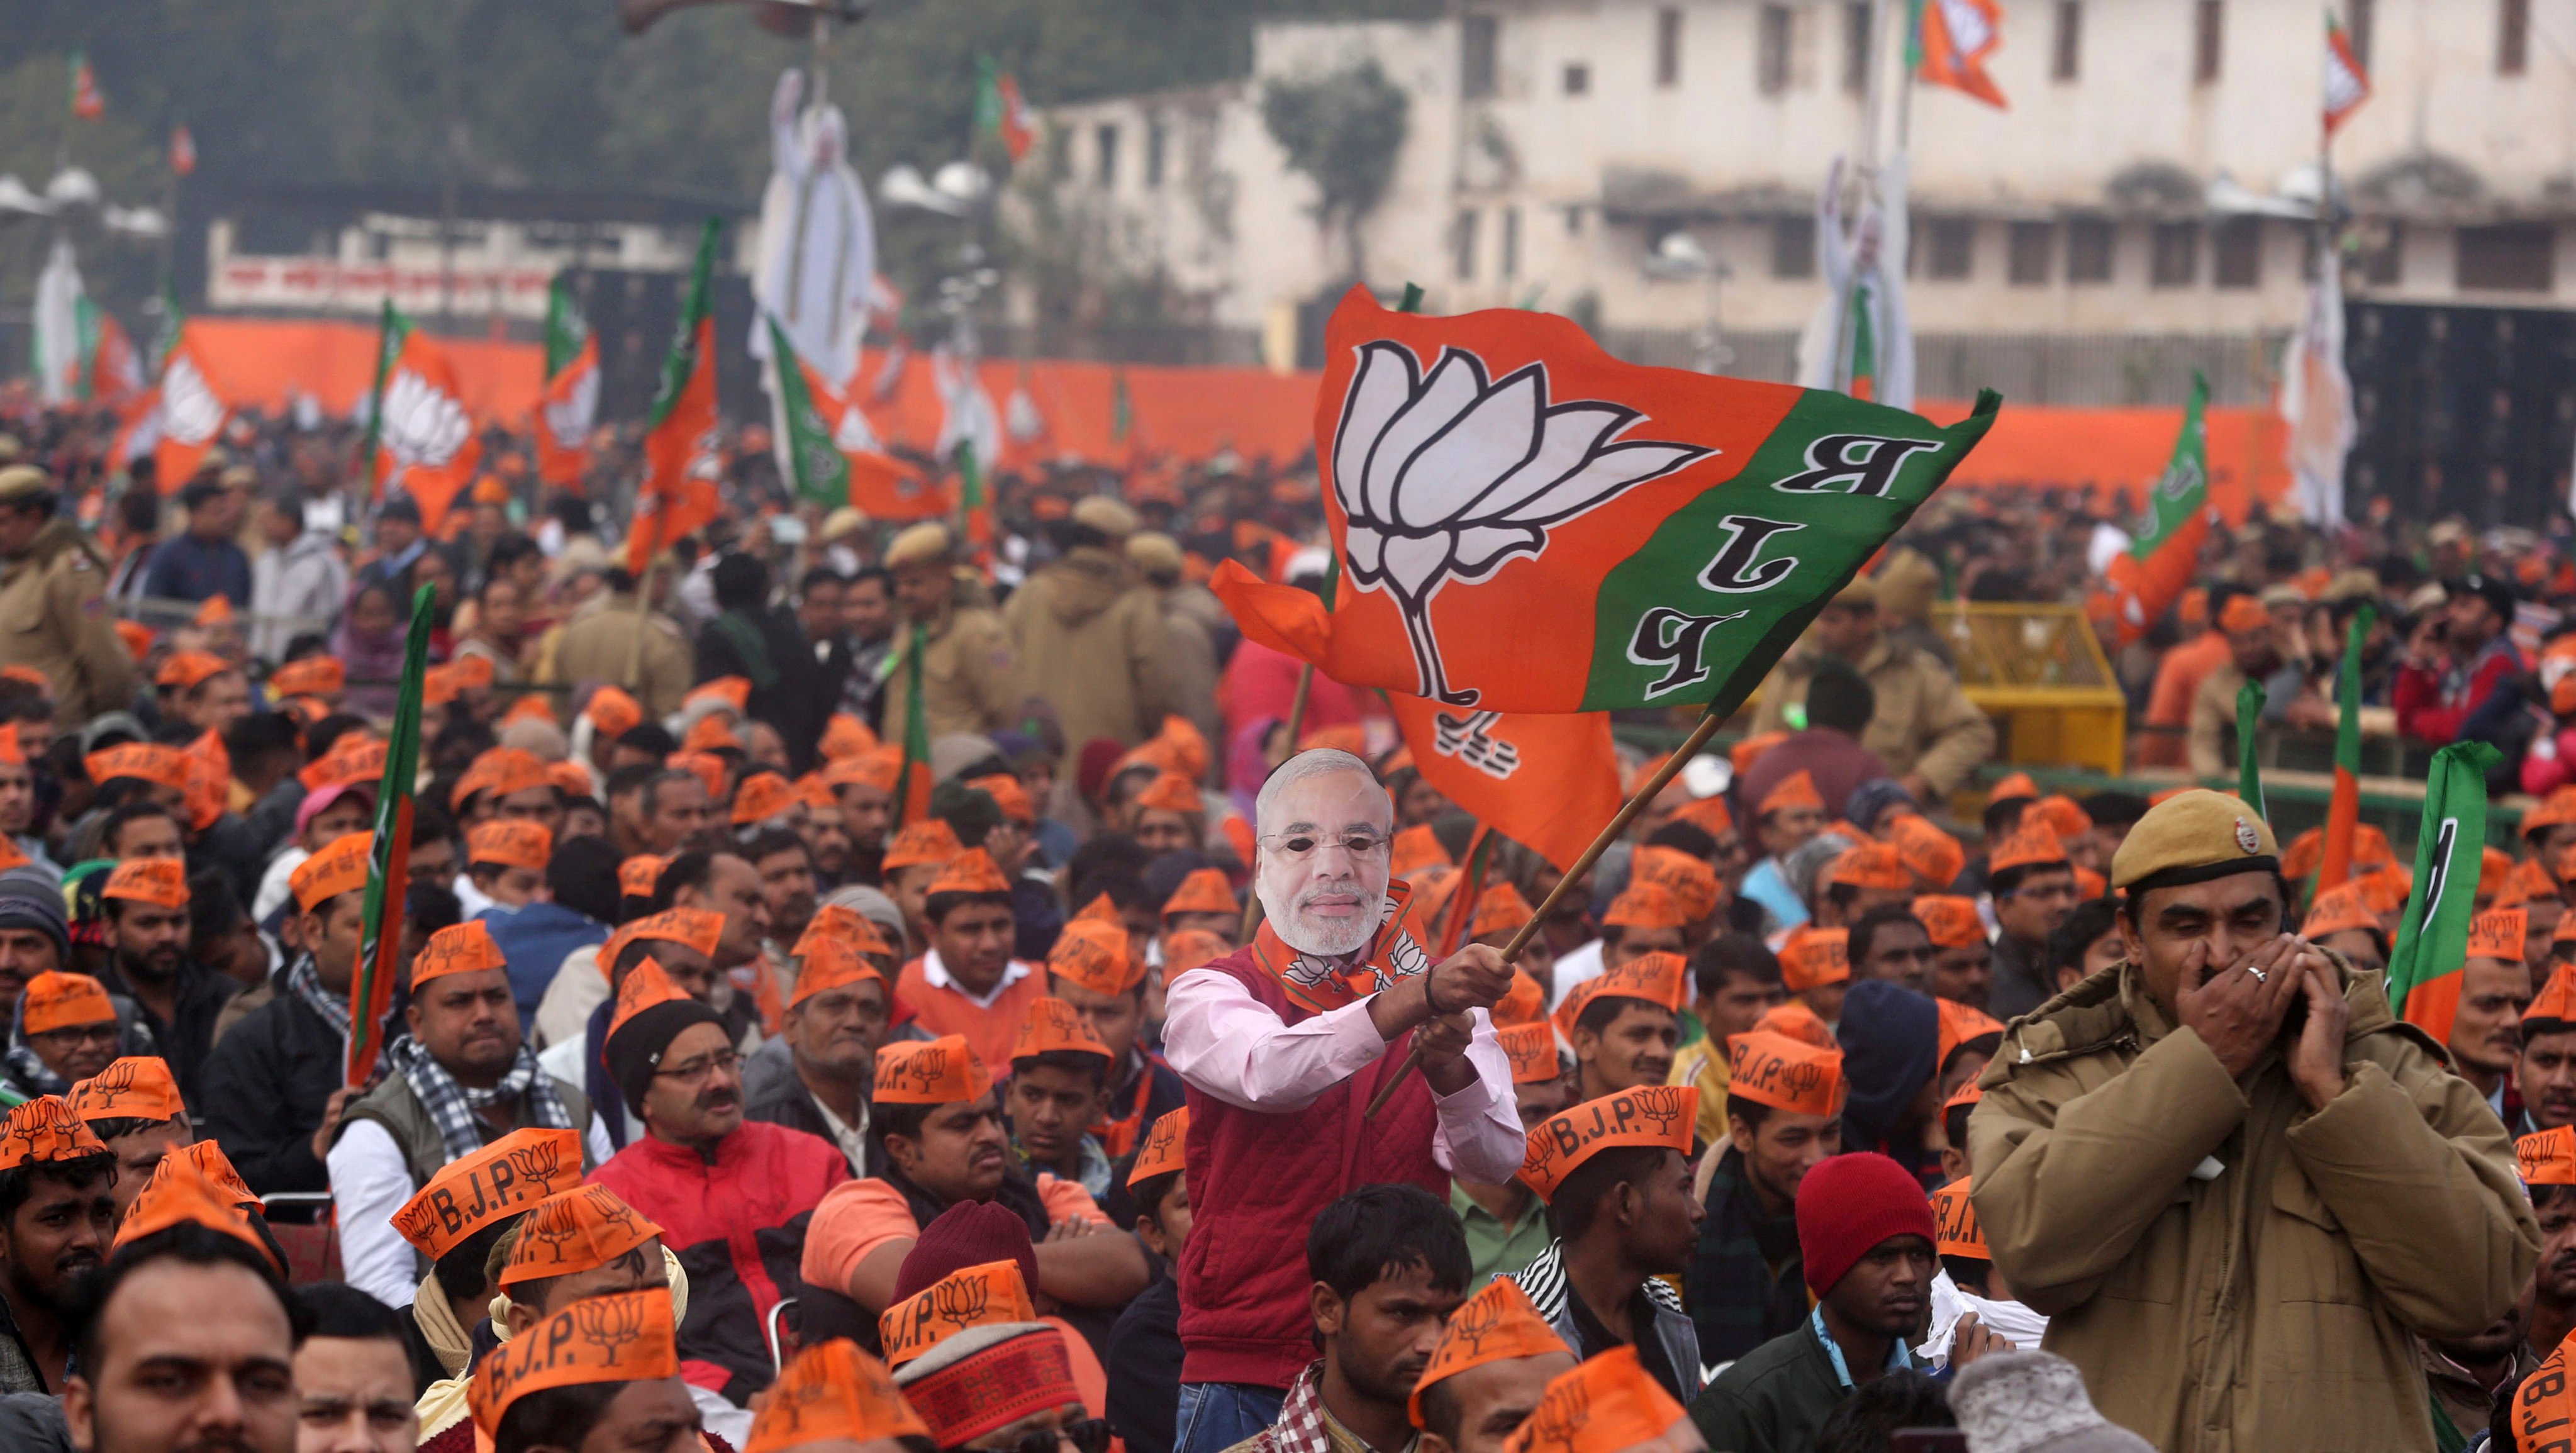 A man wearing a mask of Indian Prime Minister Narendra Modi waves a flag of his Hindu nationalist Bharatiya Janata Party during a rally in December 2019. Photo: AP